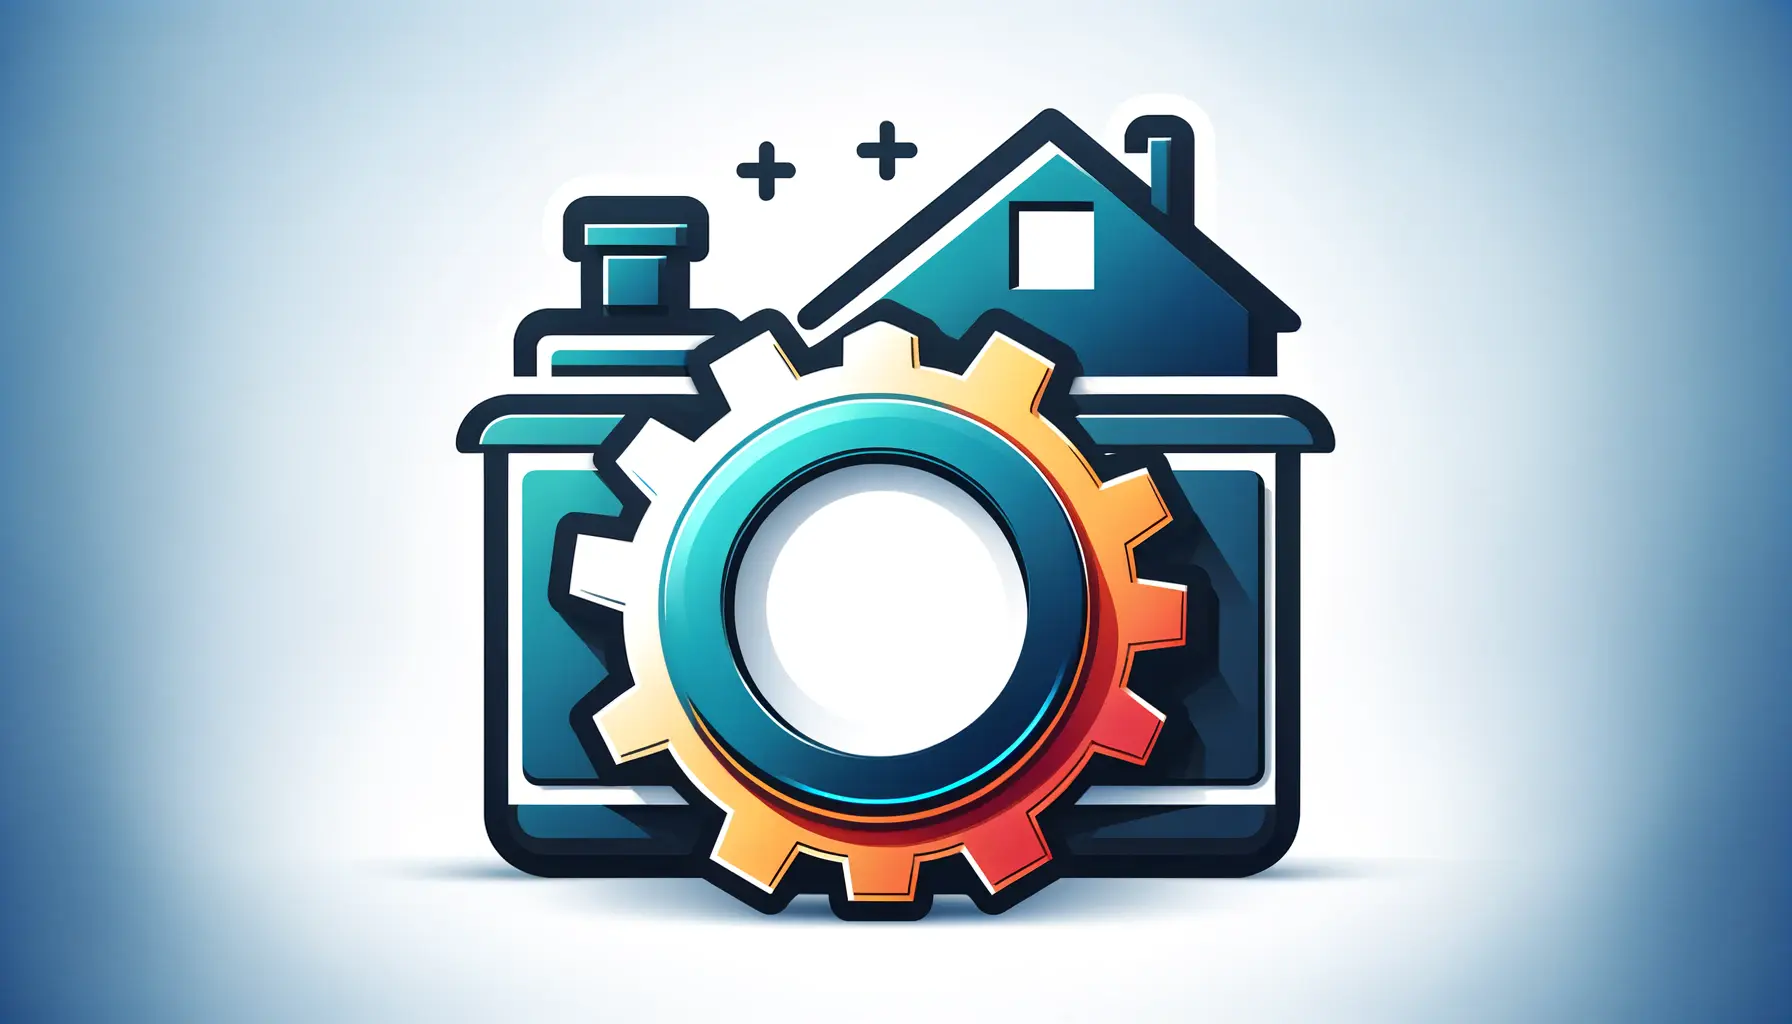 Image Optimization in Property Listings